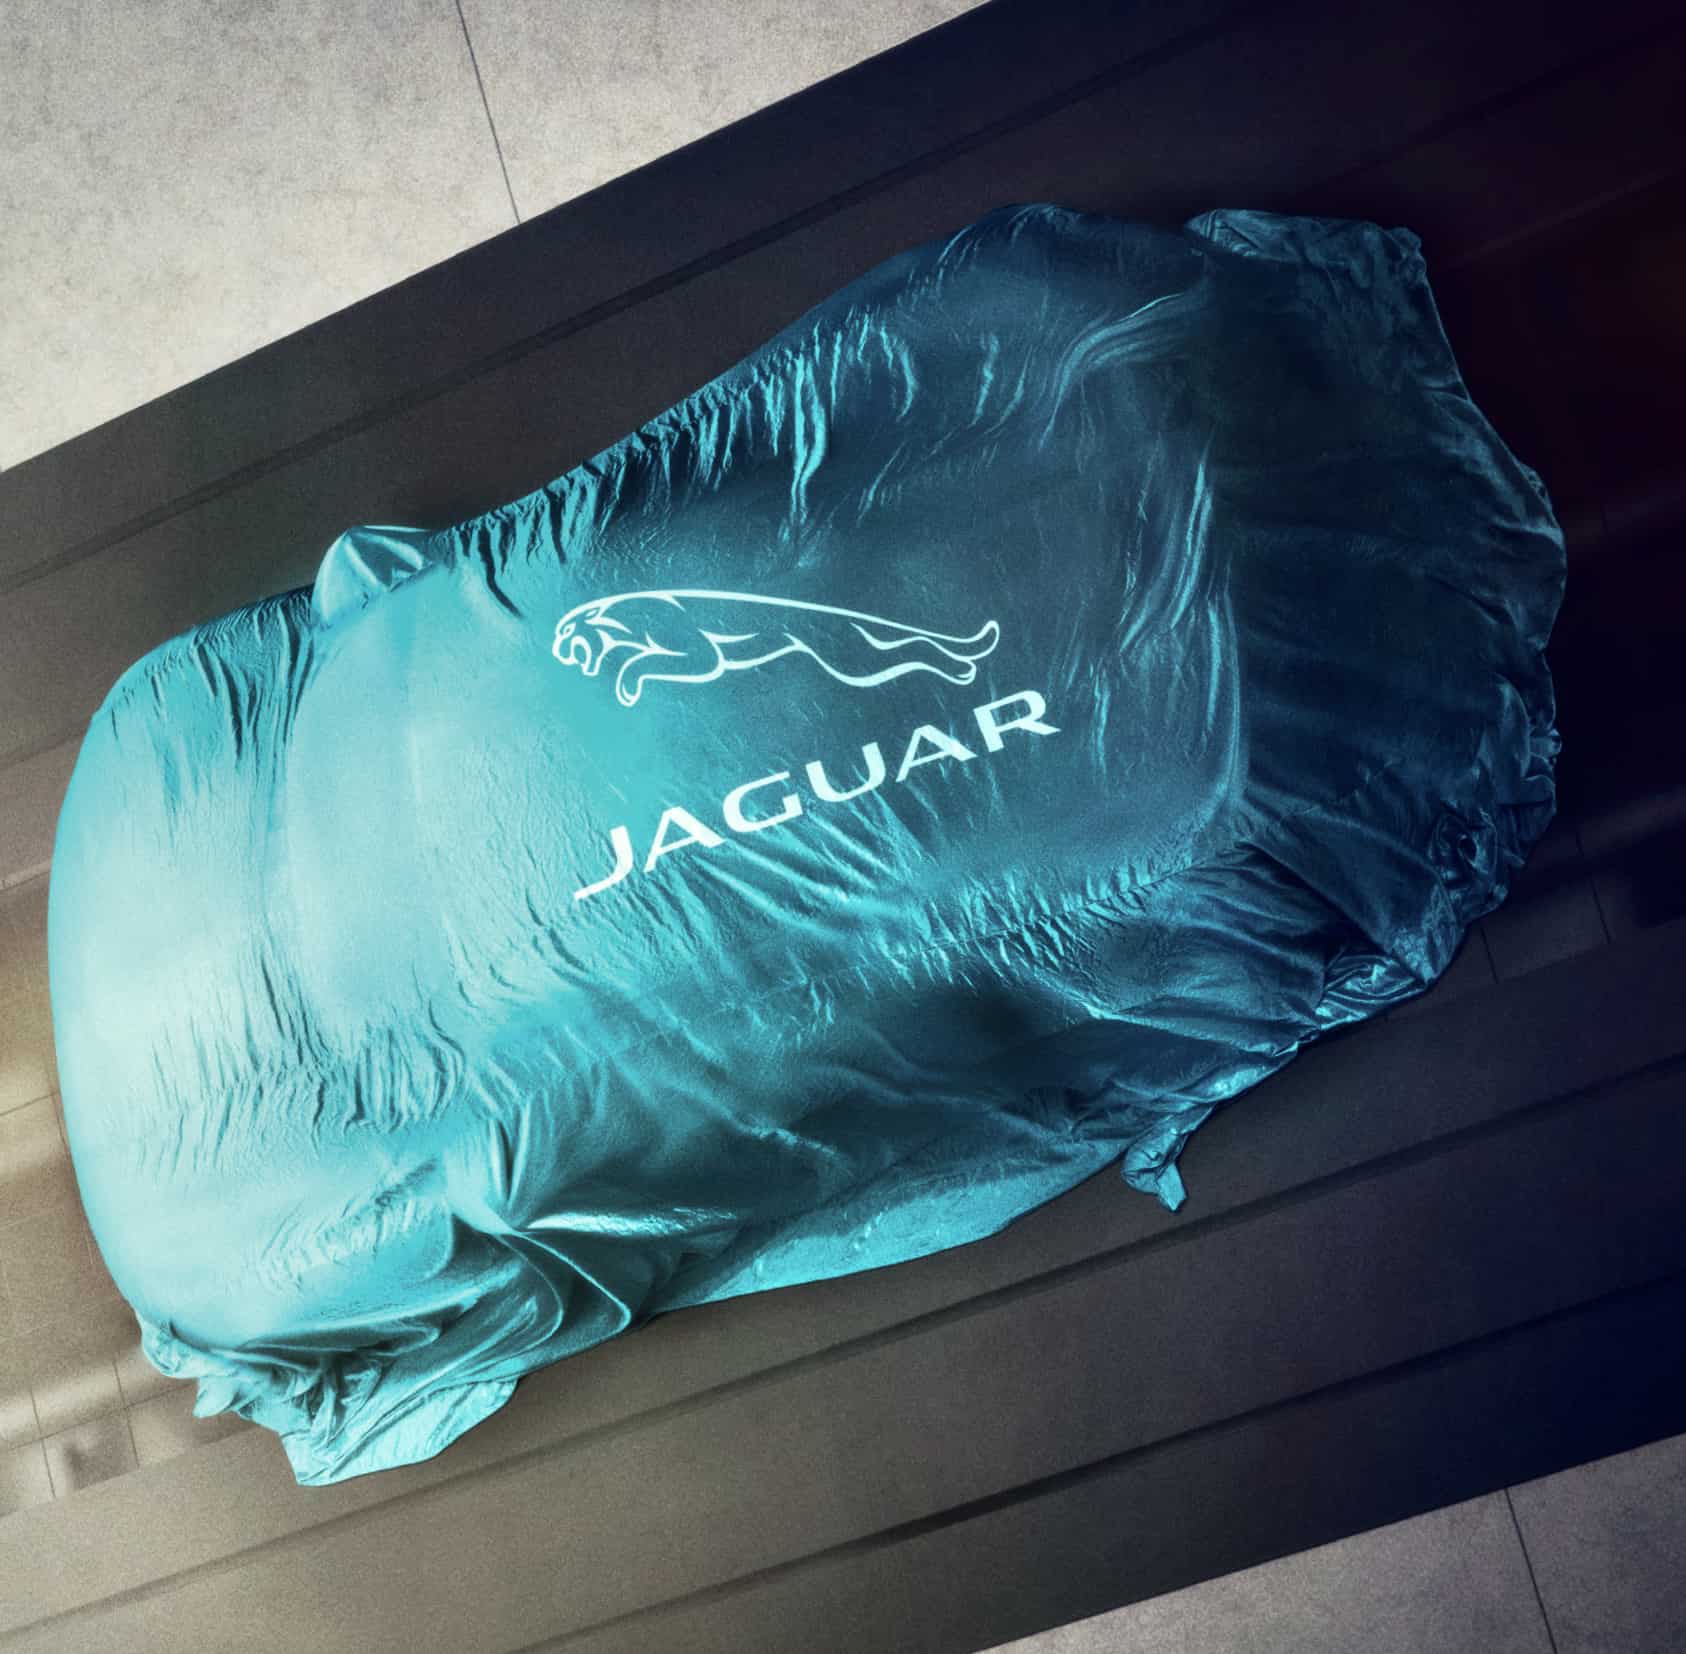 Jaguar Land Rover Announce Plan To Go All electric